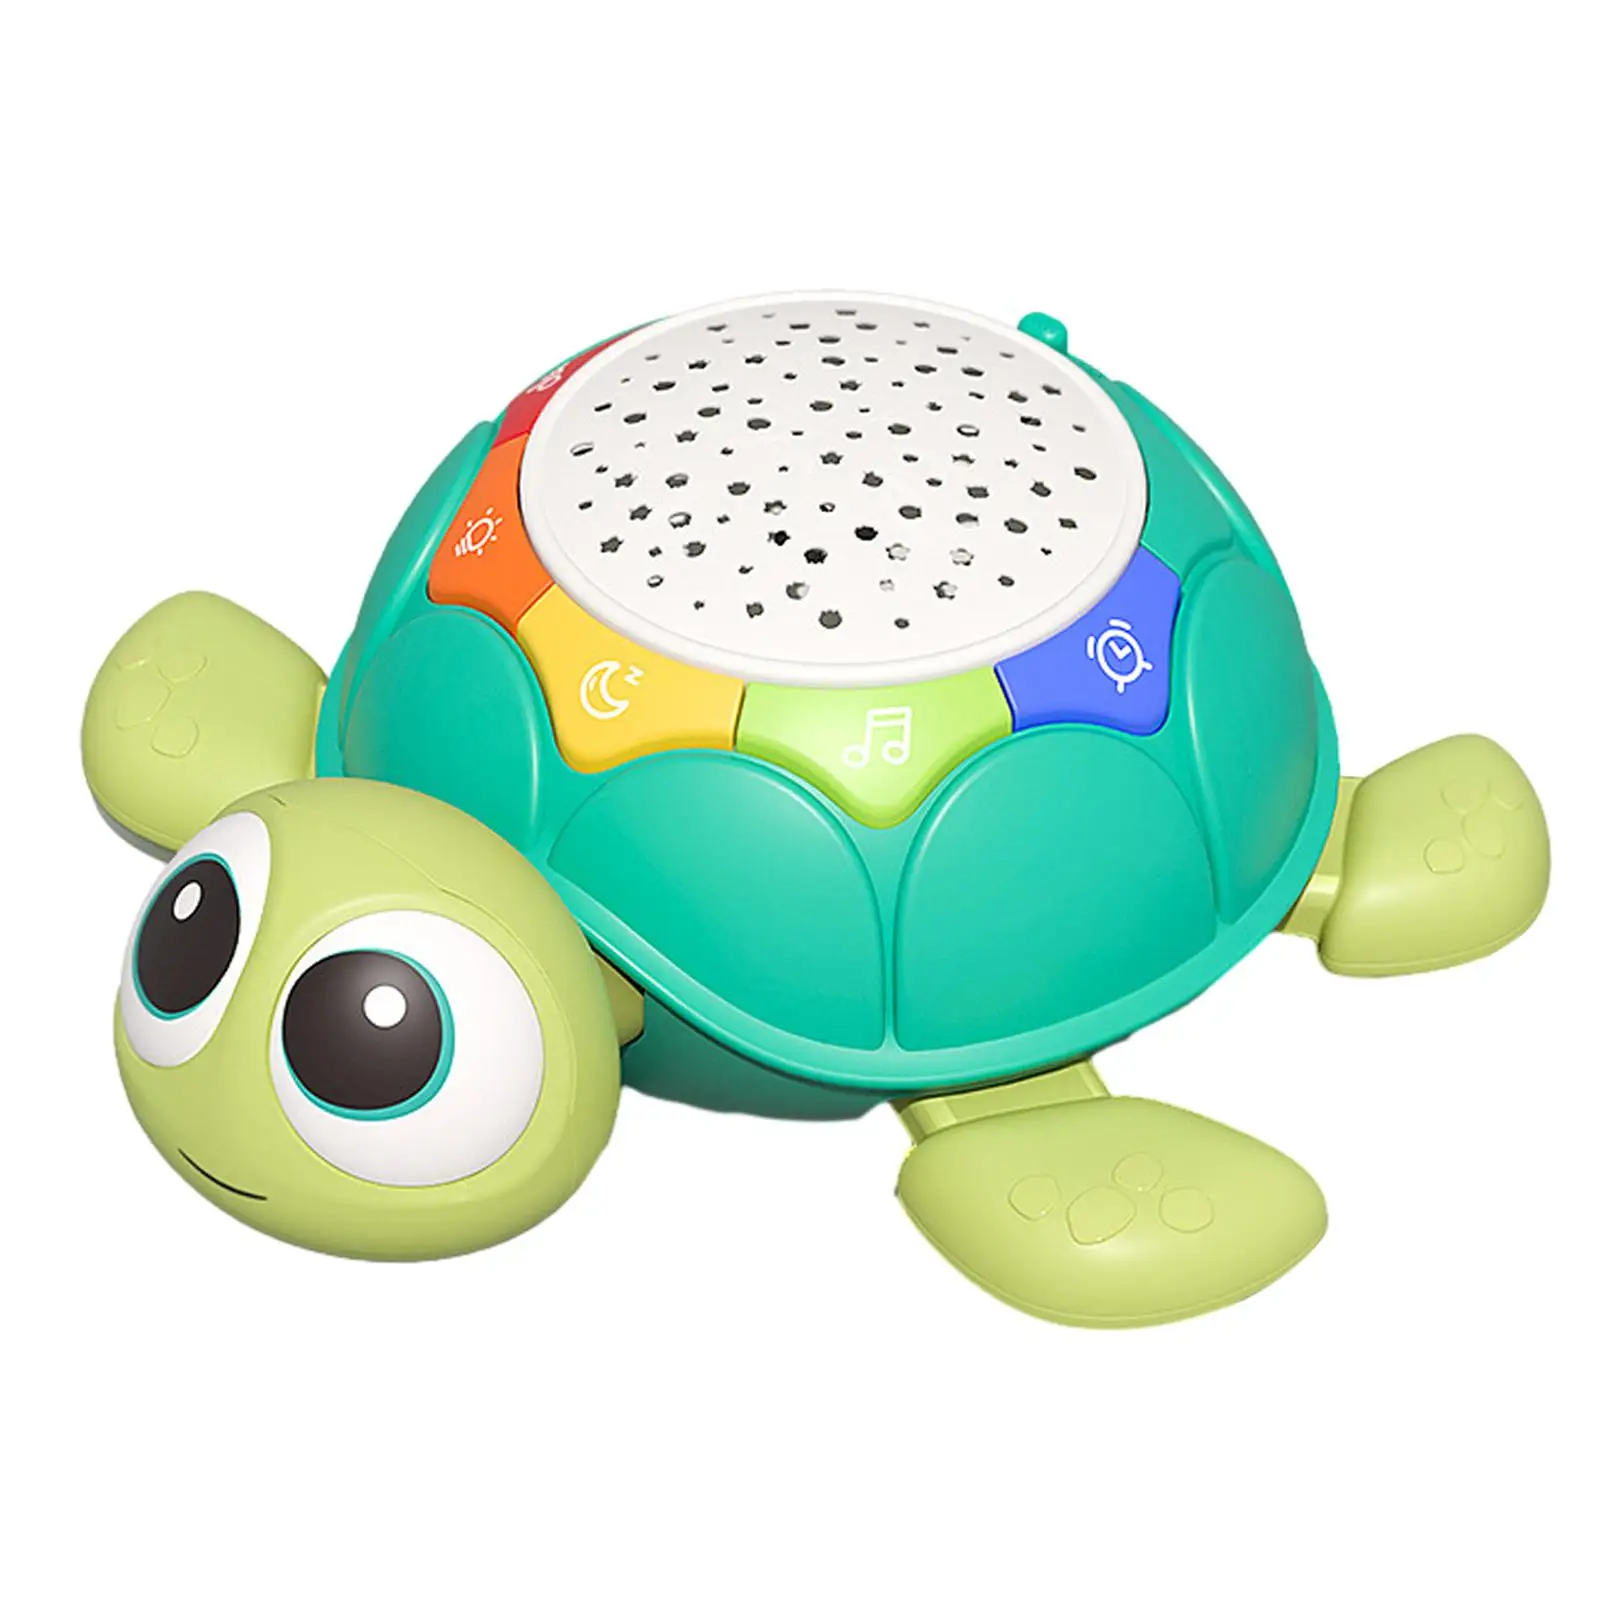 Turtle Crawling Musical Baby Toys Stocking Stuffers Starlight Baby Crawling Toy for Infant Baby Girls Boys 6 to 12 Months